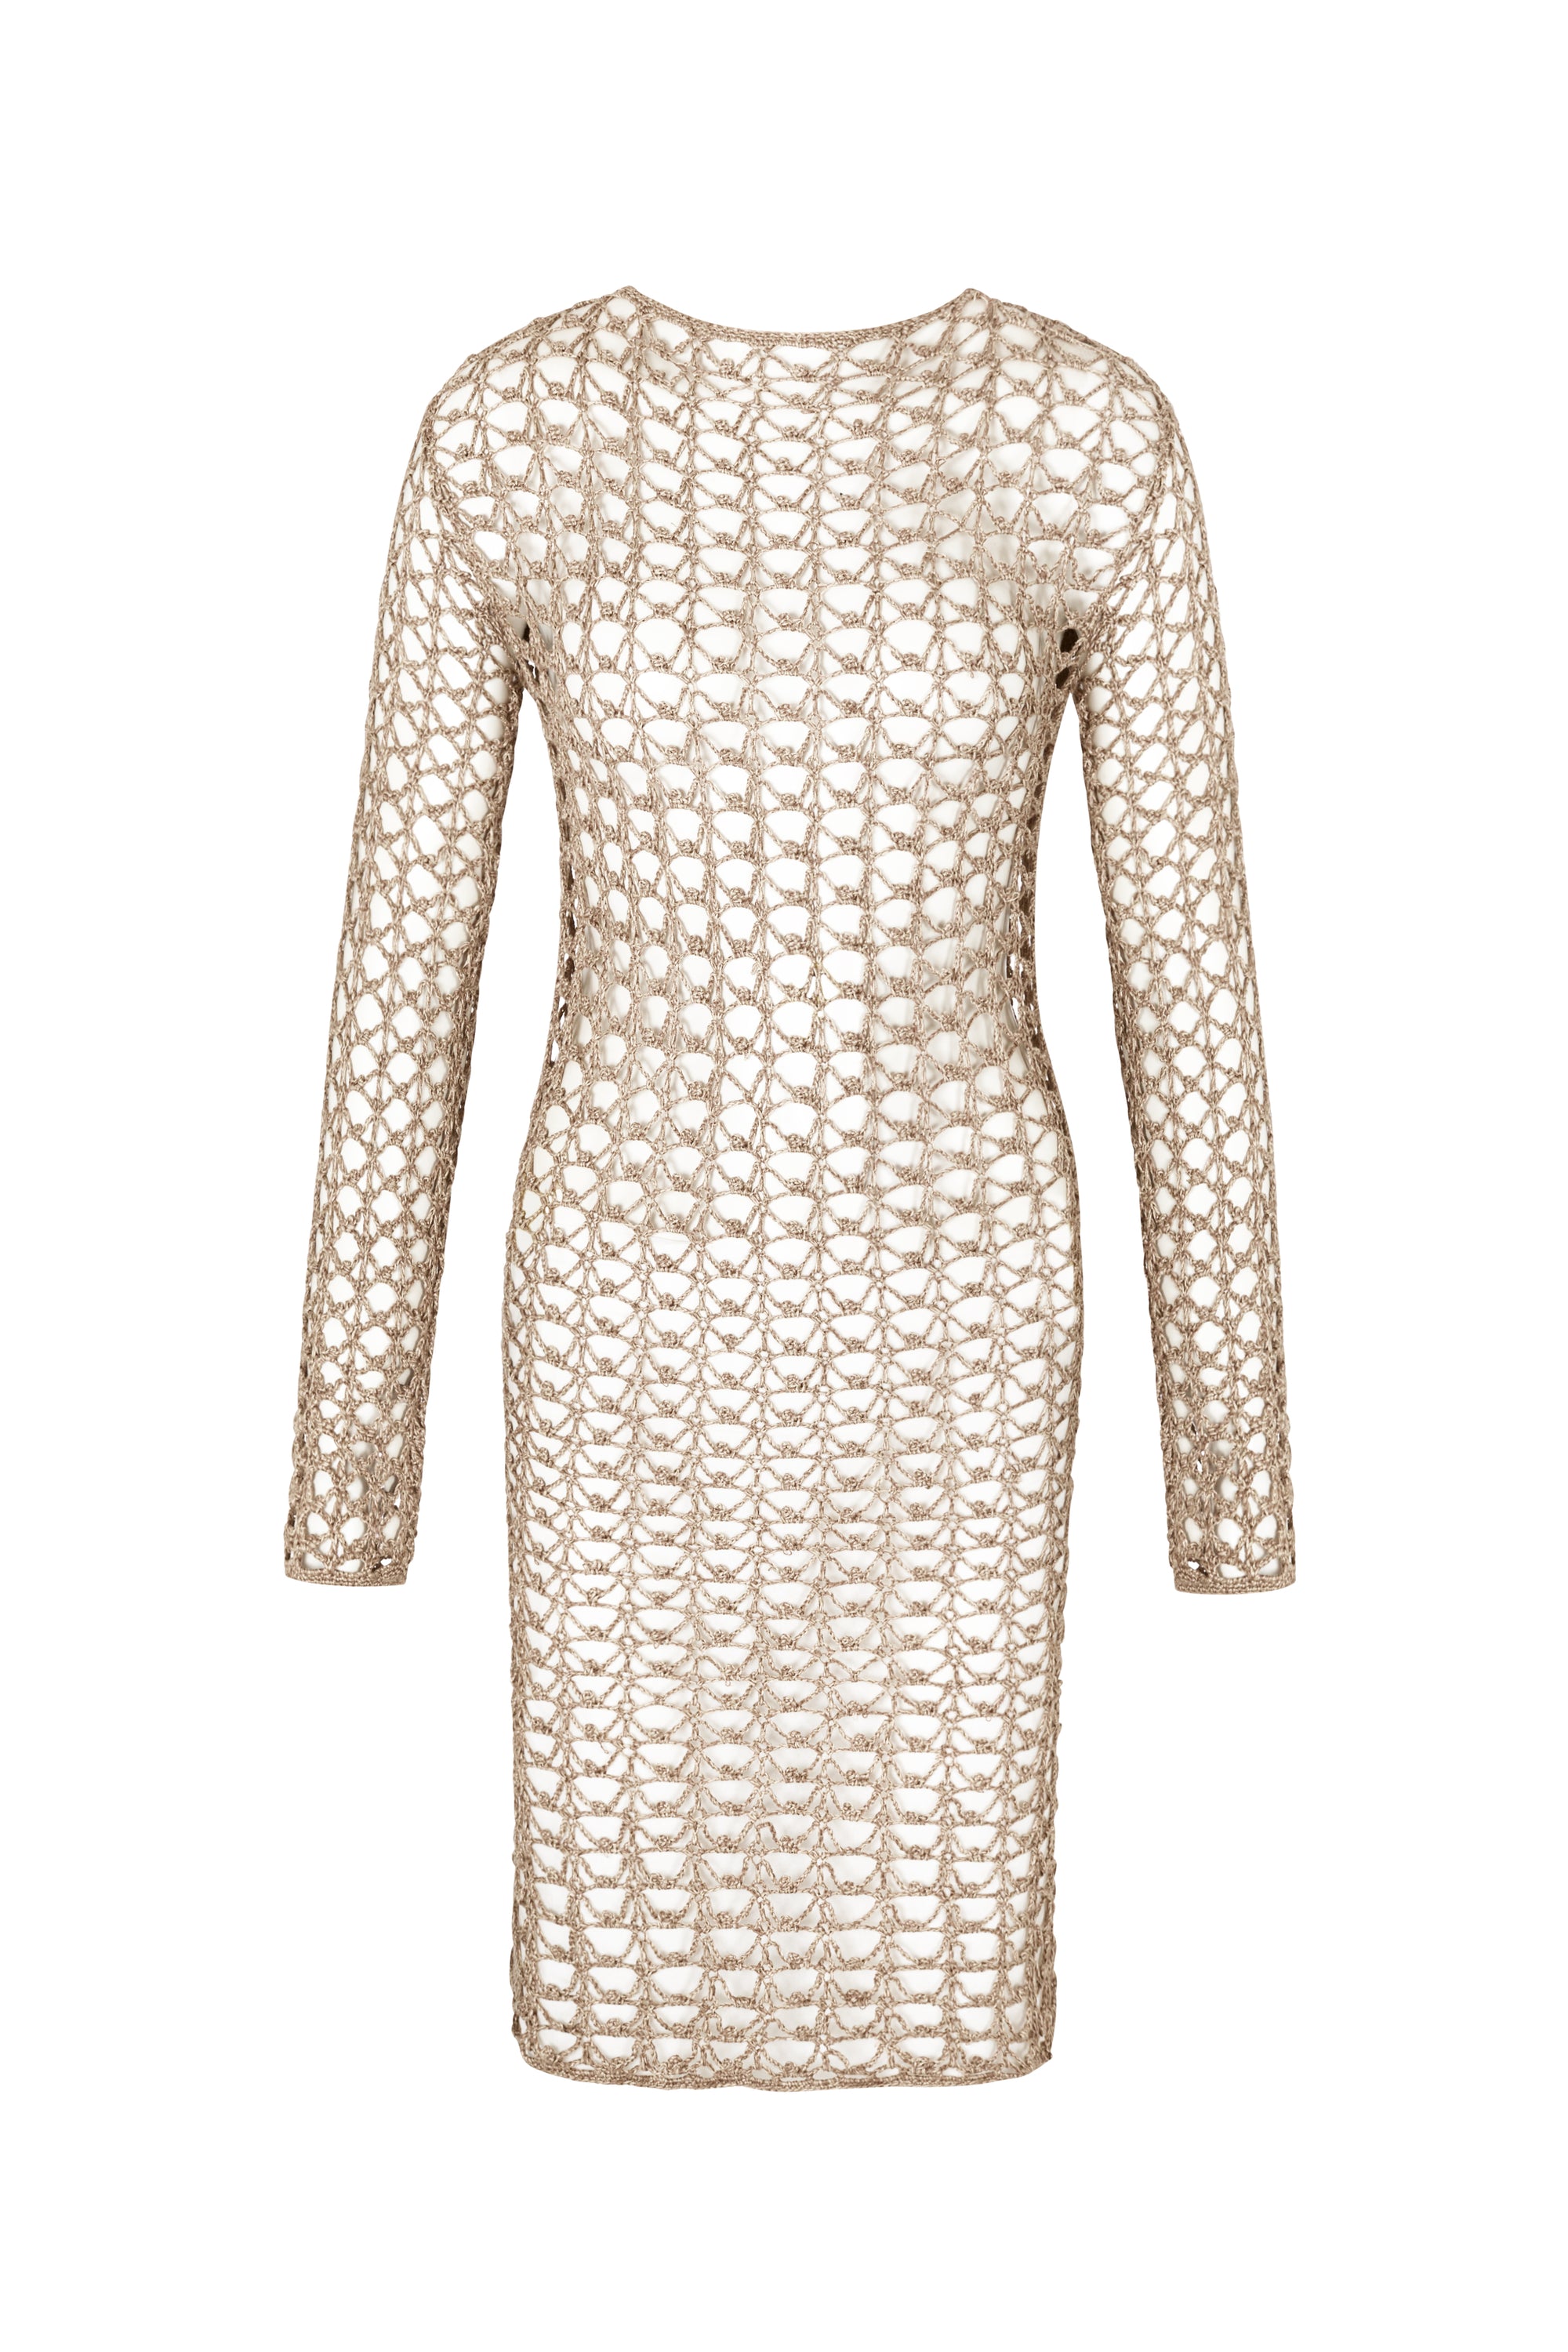 flook the label nayola dress coco crochet product image front